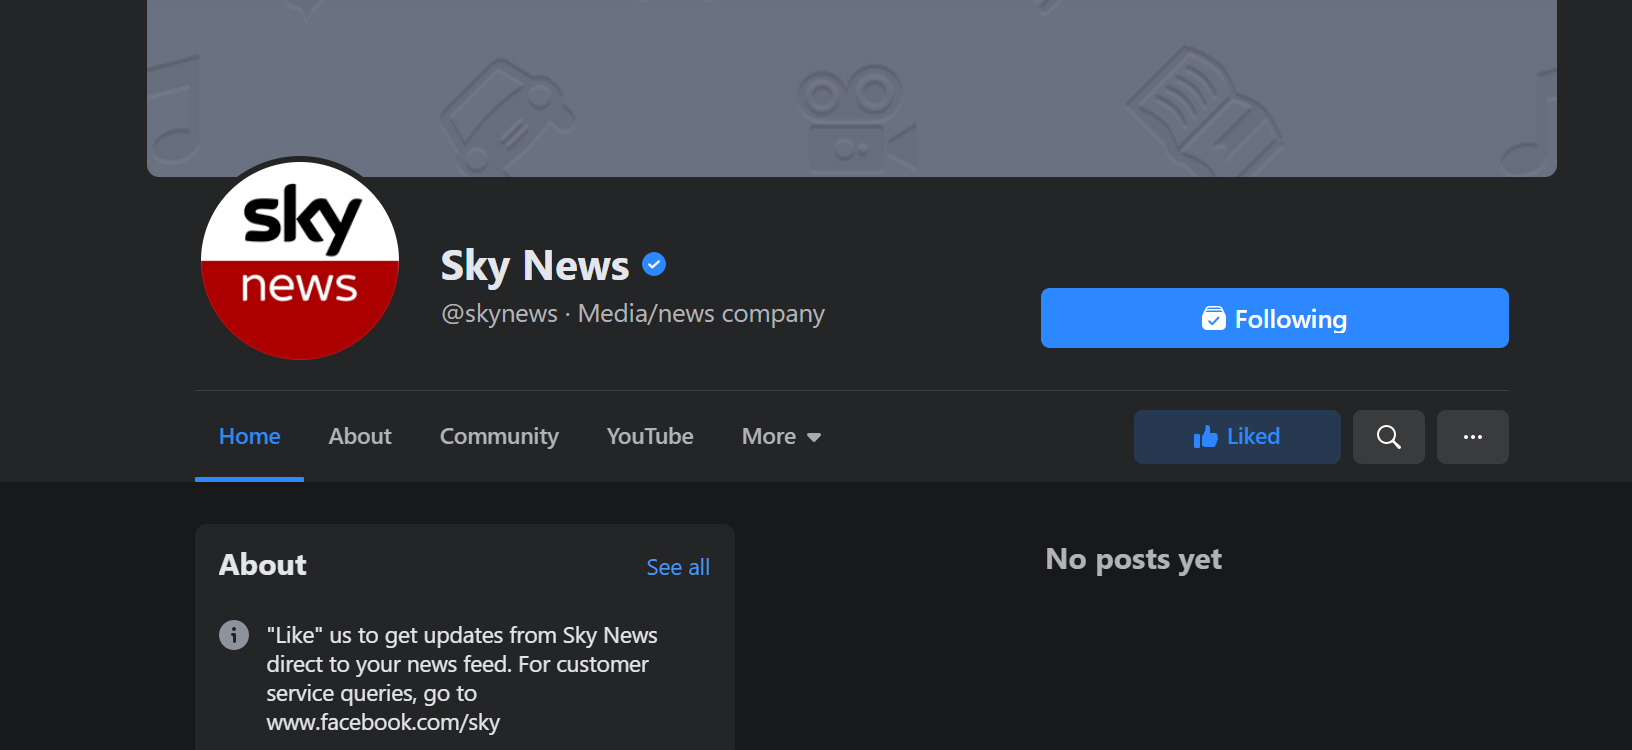 Content on Sky News's Facebook page disappears following news ban in Australia